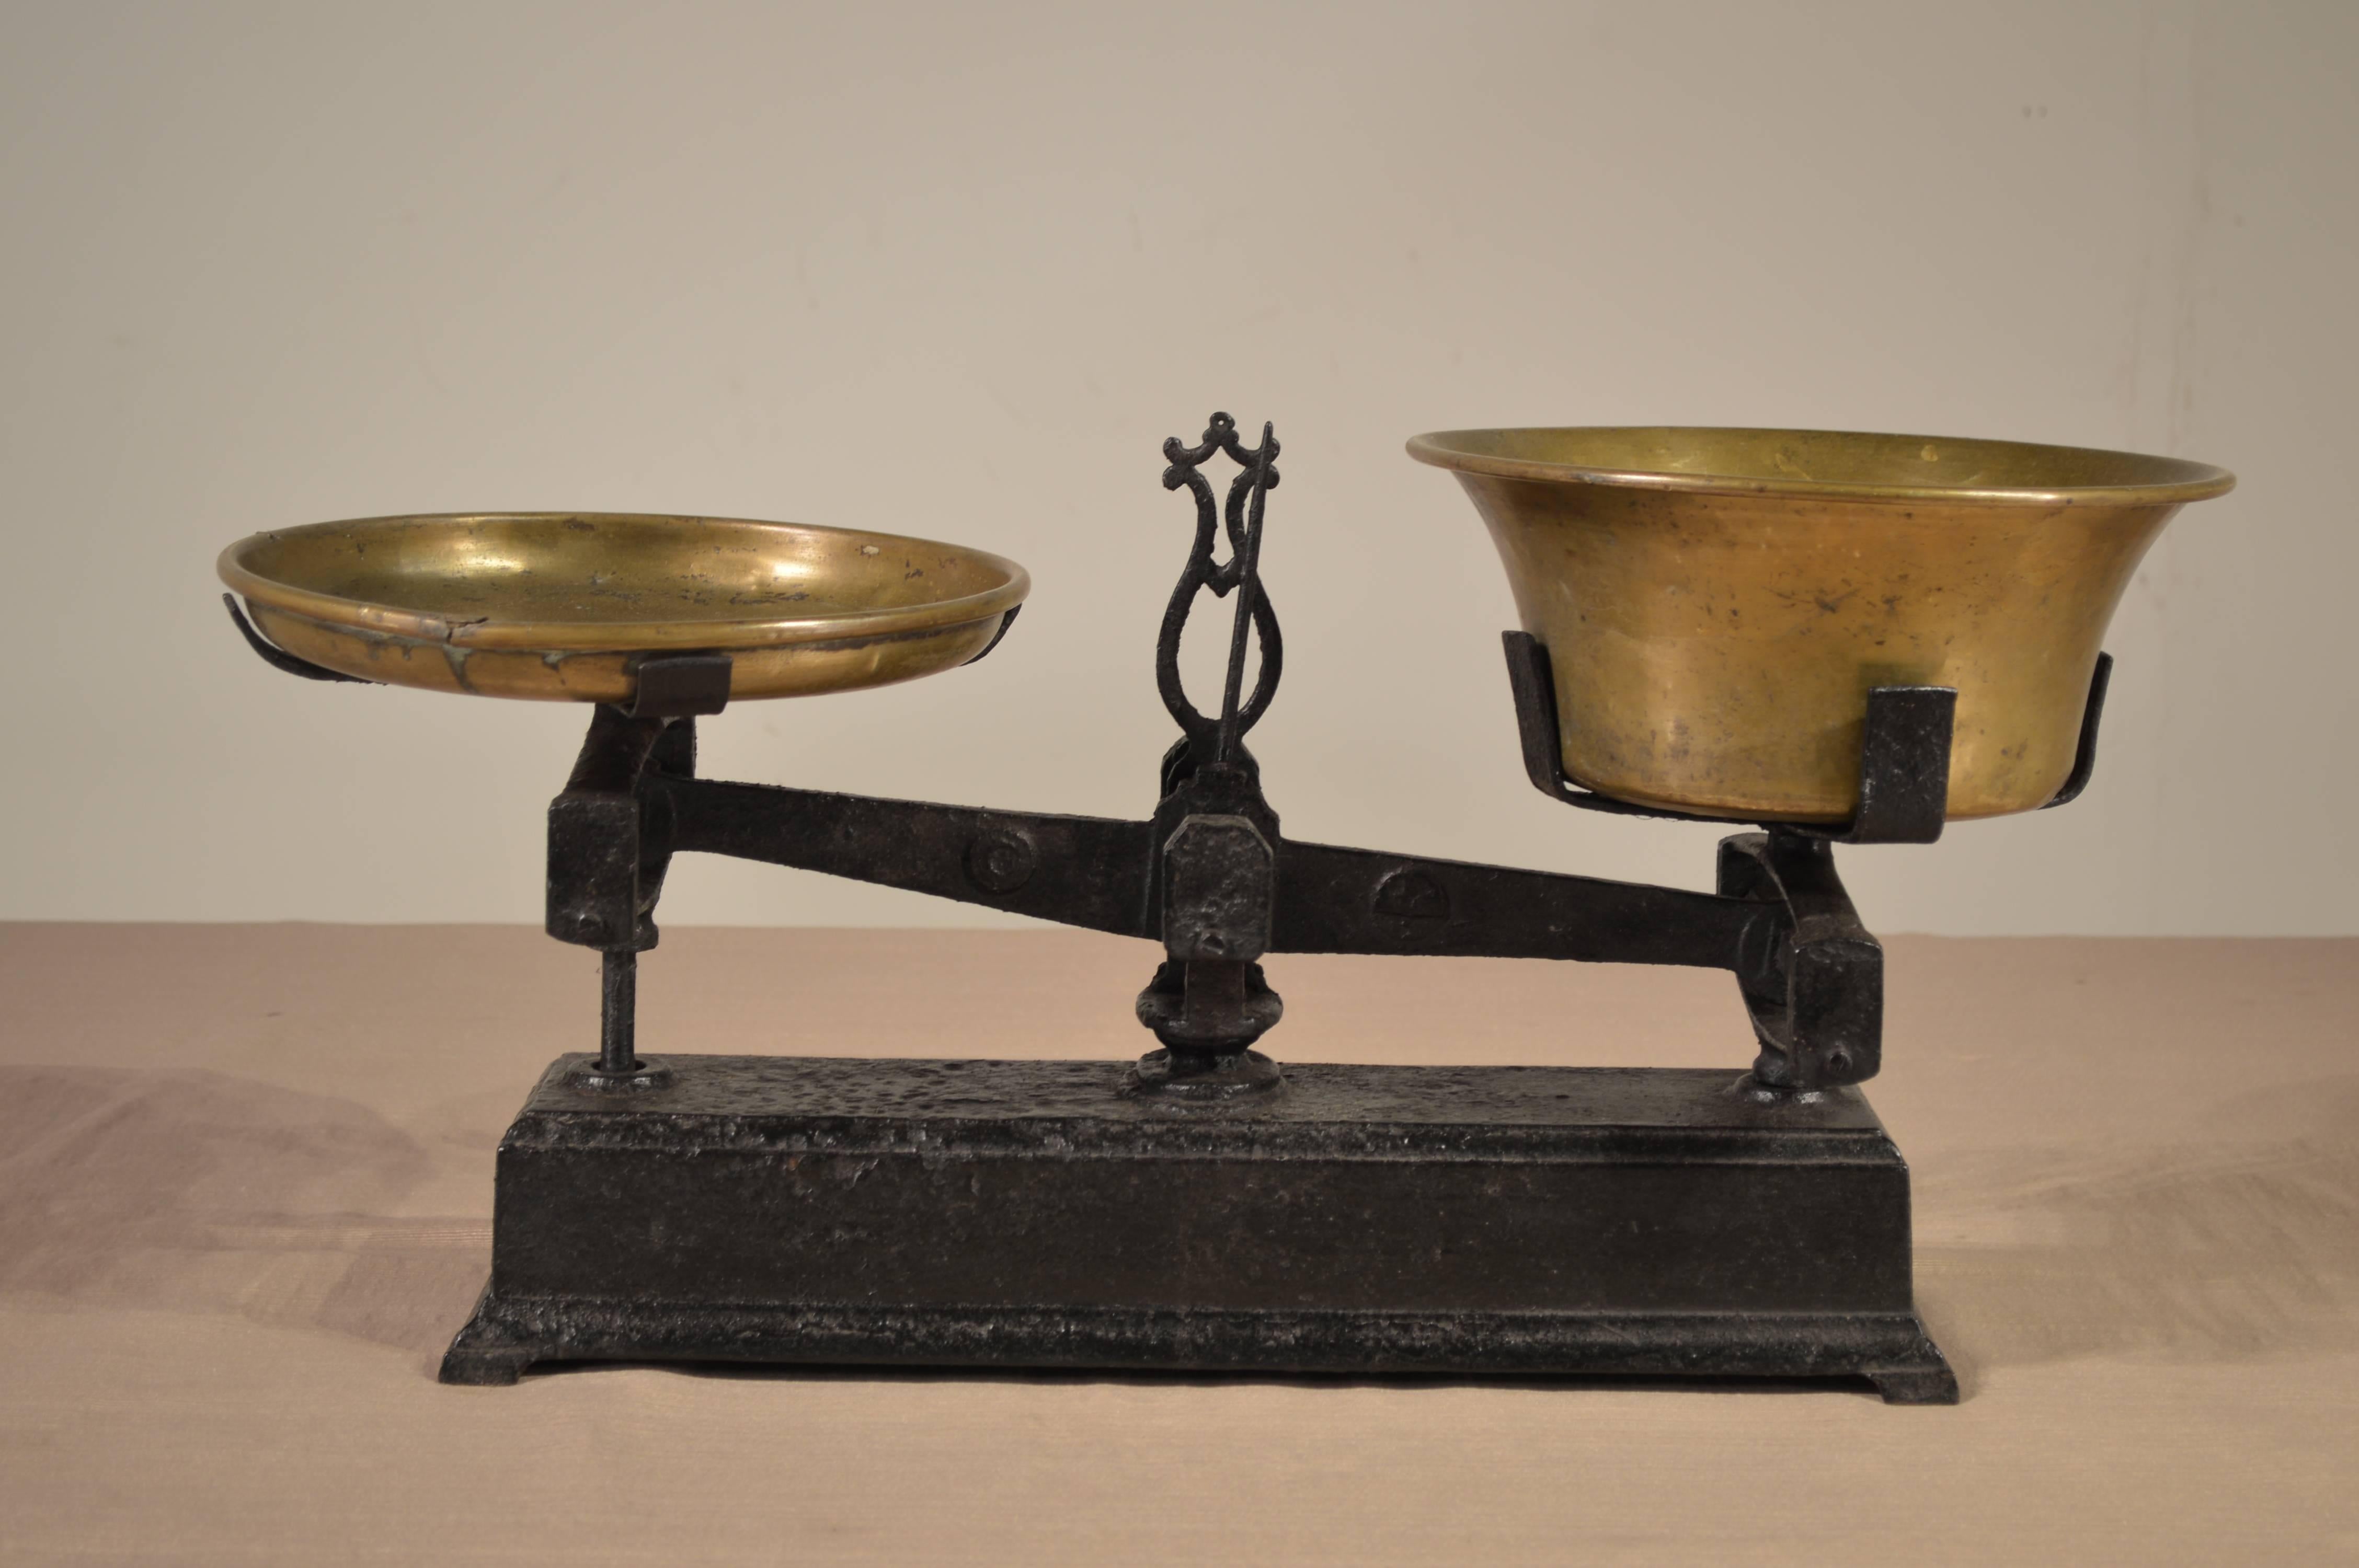 19th century French scale-made from iron with brass weighing bowls. Comes with four weights. Lovely size and proportion.